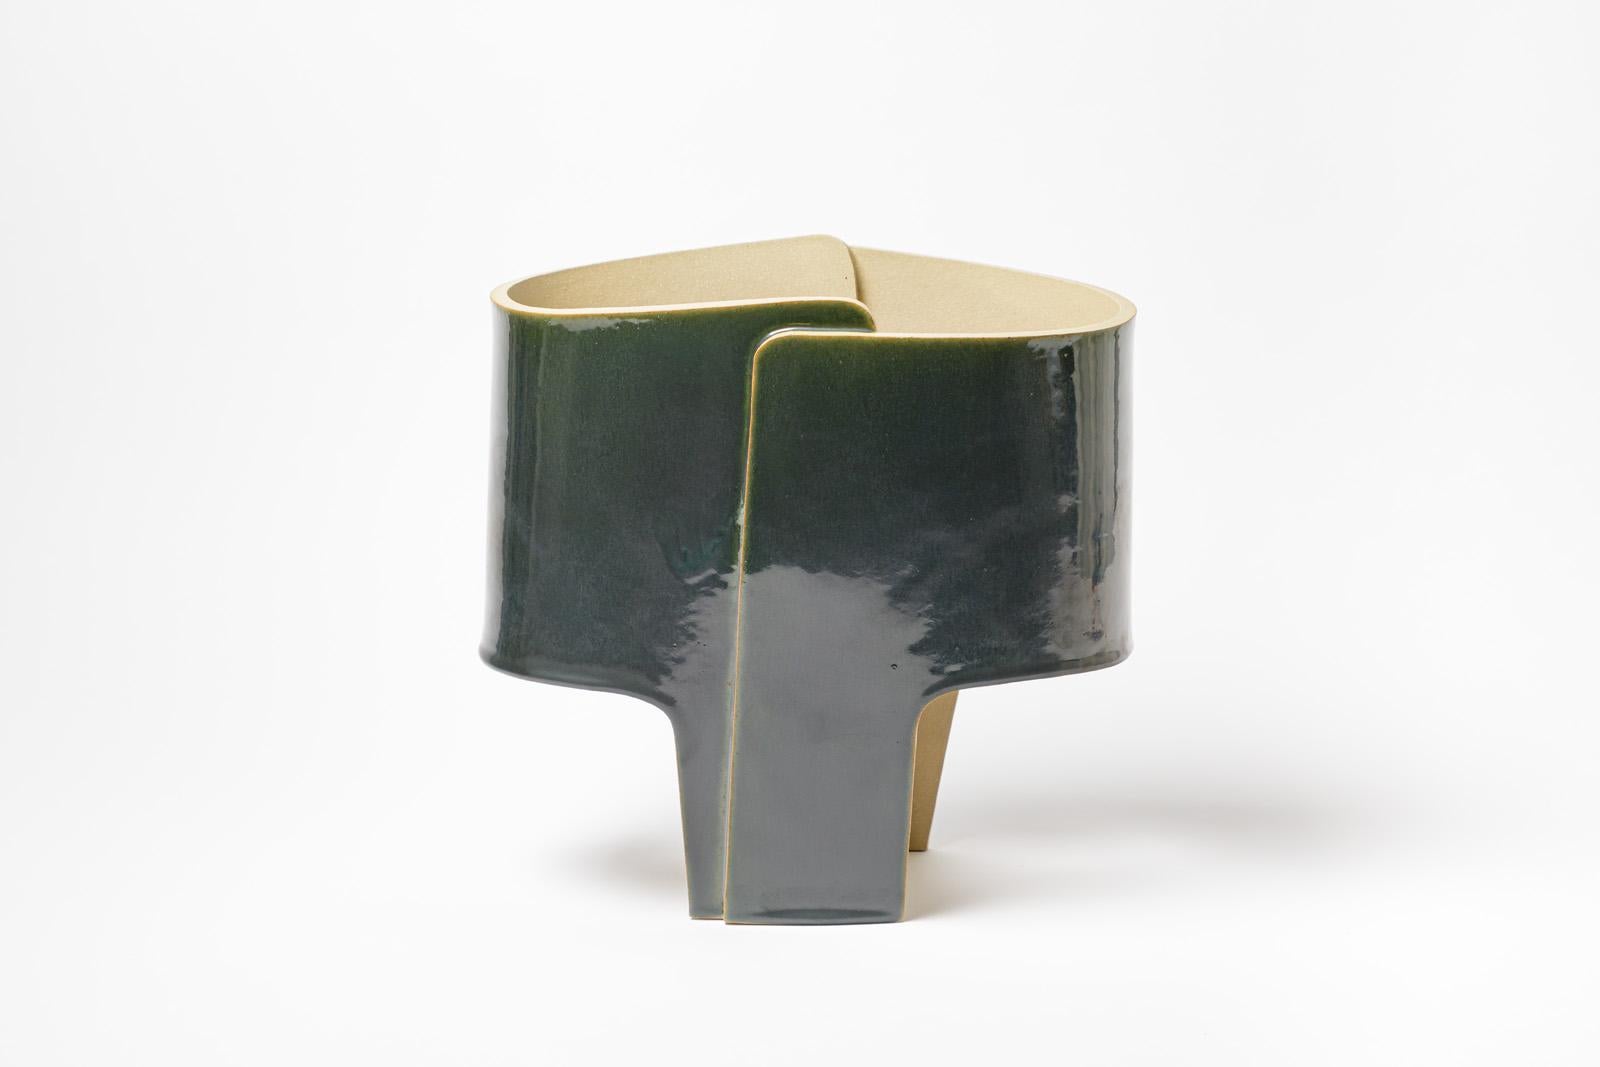 « Nocta_03 » table lamp in dark green glazed stoneware by Denis Castaing.
Sold with a new European electrical system.
2020.